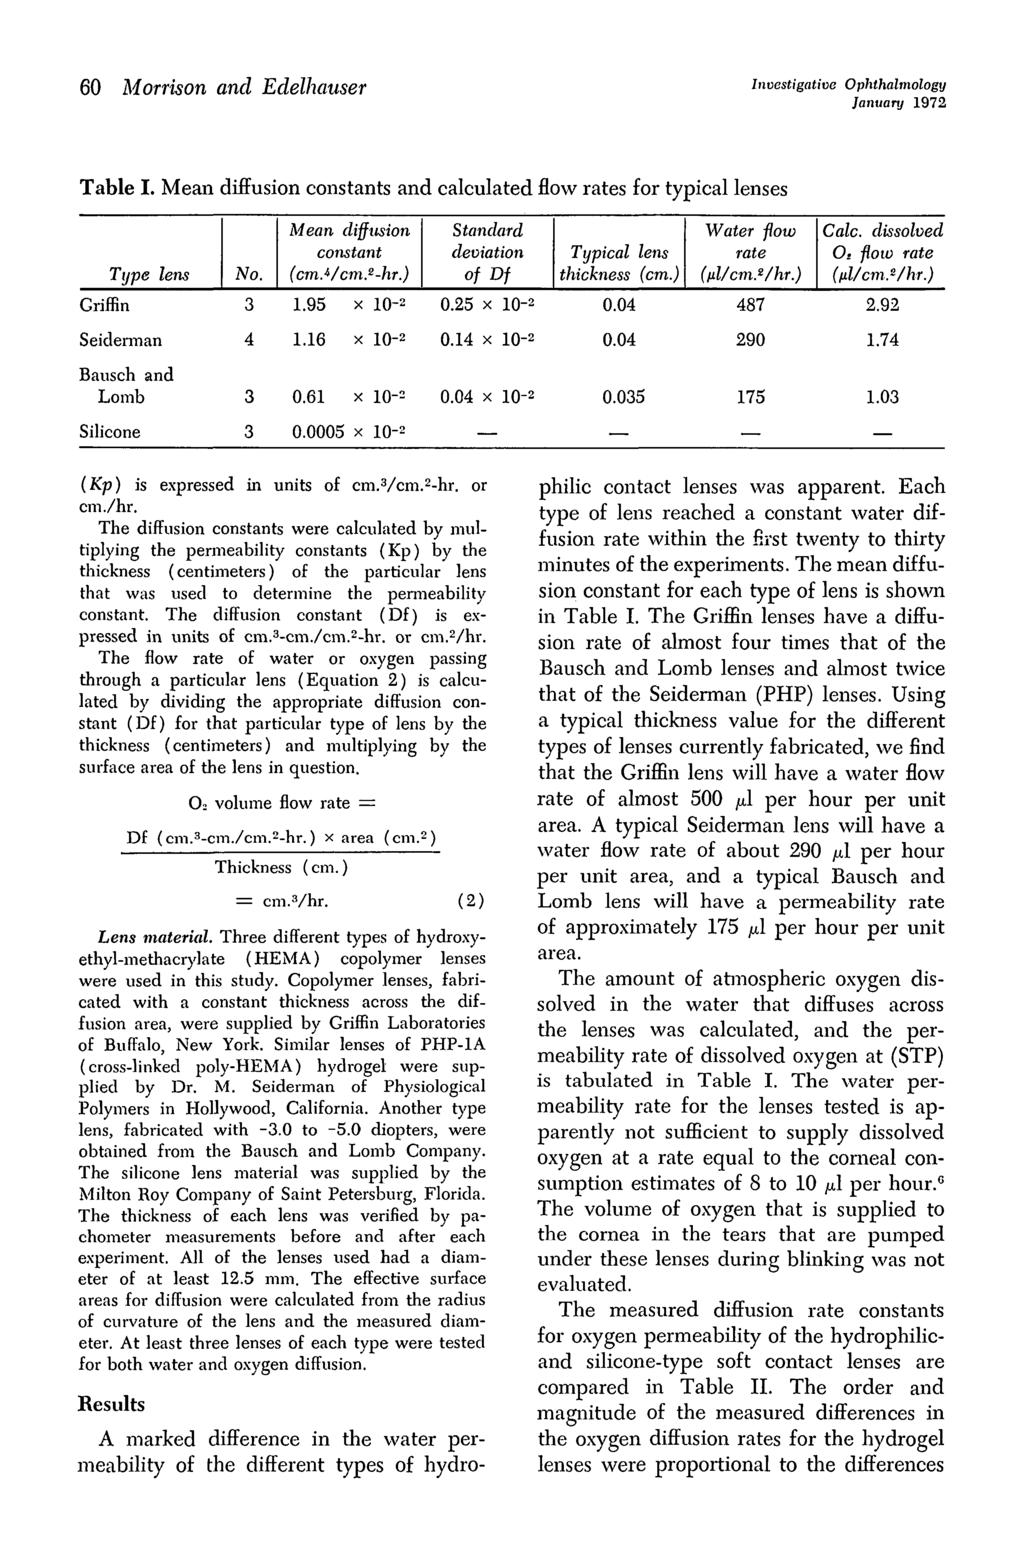 60 Morrison and Edelhauser Investigative Ophthalmology January 1972 Table I. Mean diffusion constants and calculated flow rates for typical lenses Type lens No. 4 Mean diffusion constant (cma/cm.